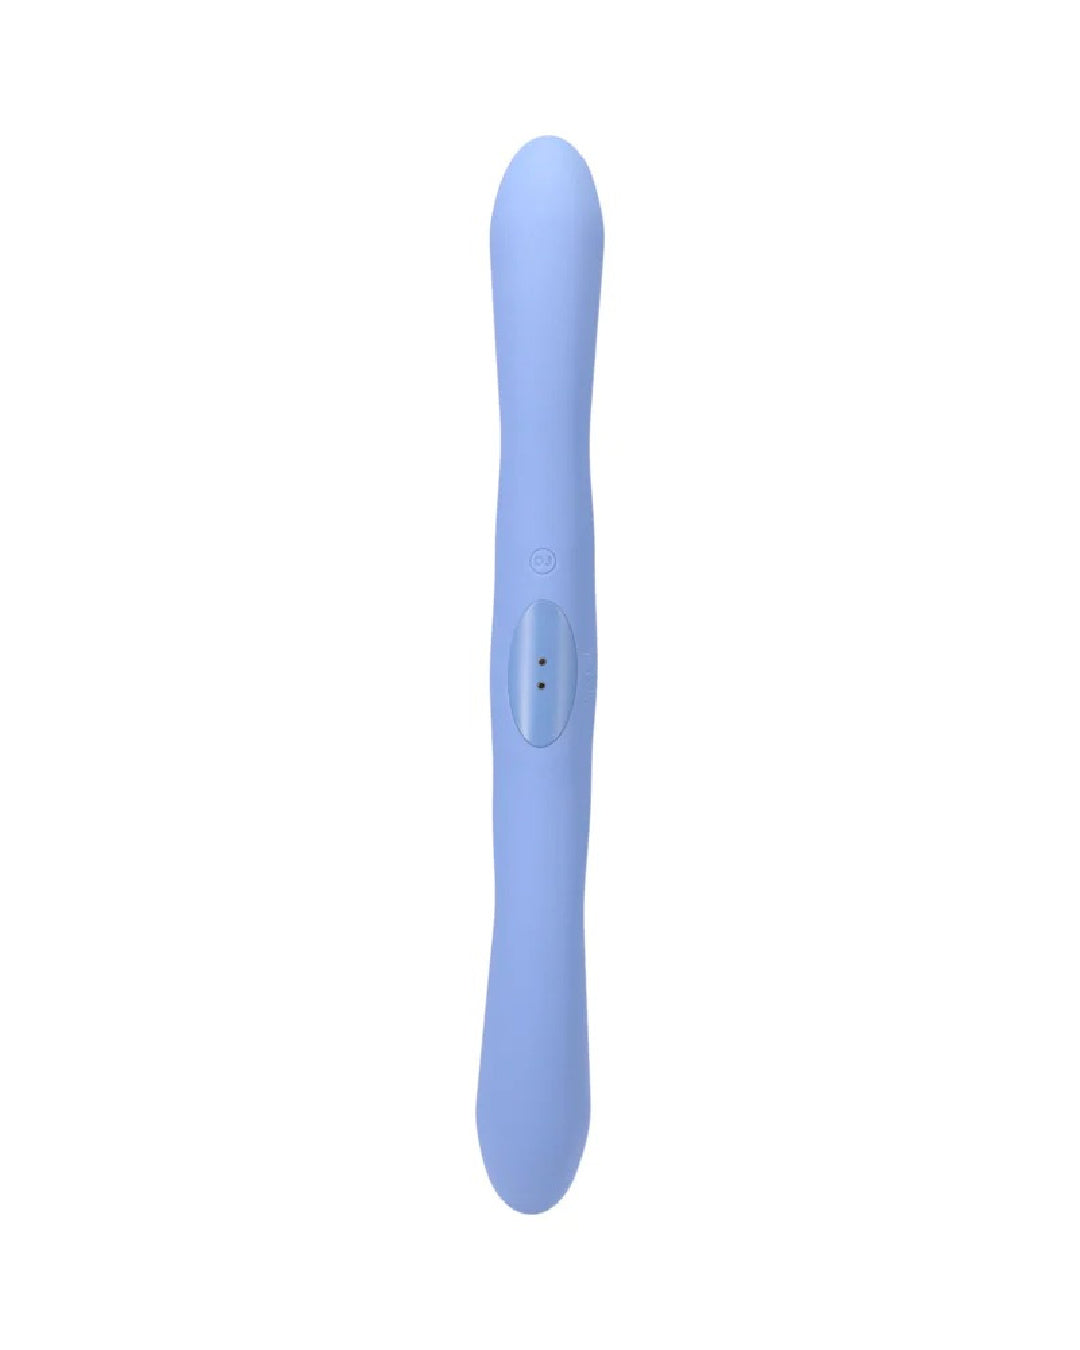 Tryst Duet Double Ended Vibrator with Remote - Vibrator facing forward showcasing its varying widths from top to bottom - top is a little wider then tapers downwards, getting wider towards the middle, then tapering a little, getting wider again towards the other end